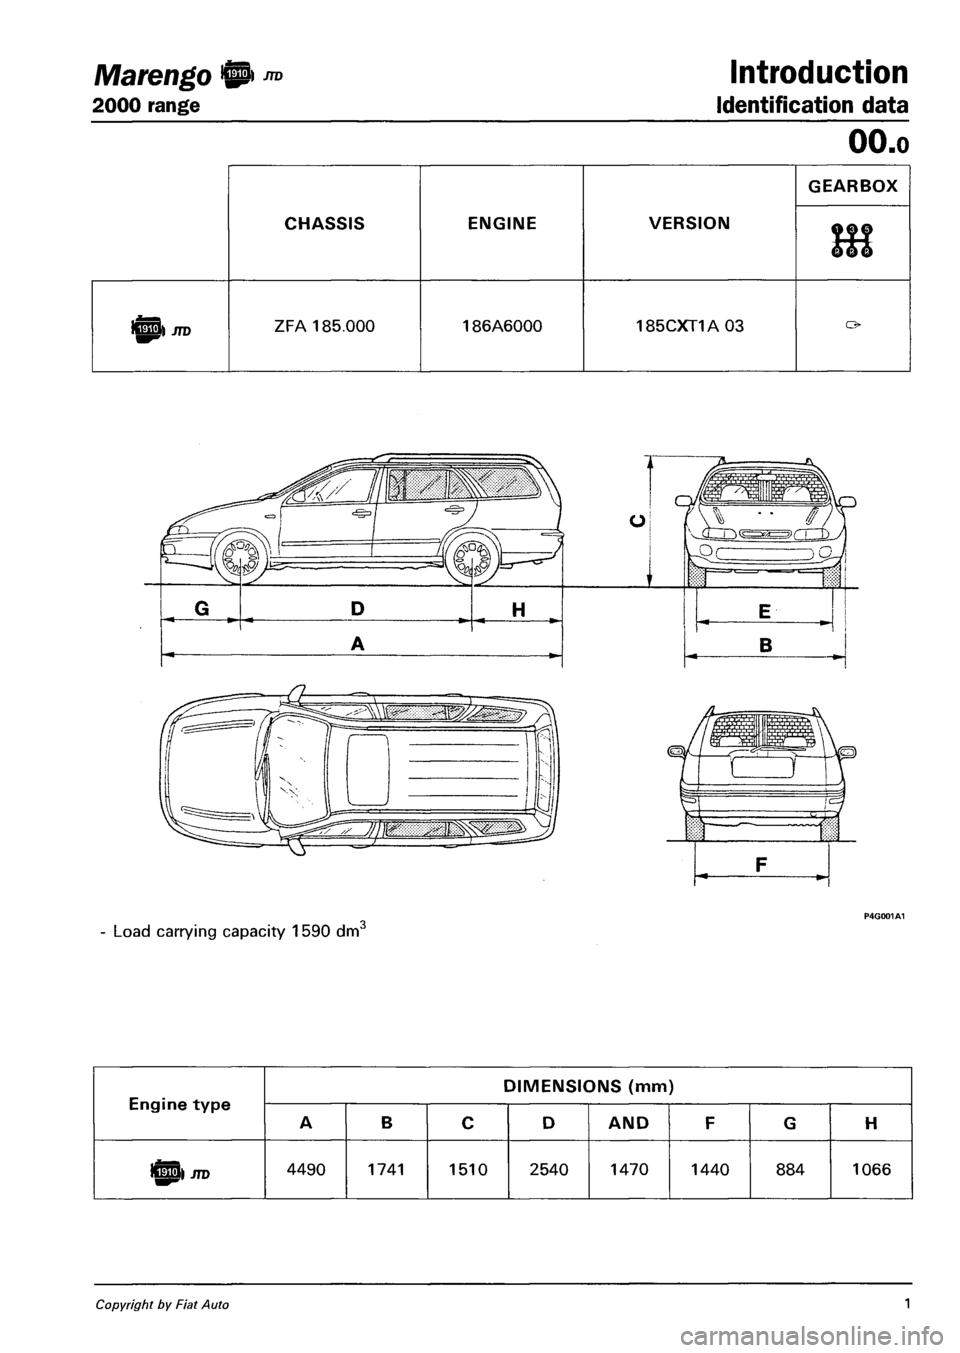 FIAT MAREA 2000 1.G Repair Manual Marengo fl ™ Introduction 
2000 range Identification data 
OO.o 
CHASSIS ENGINE VERSION 
GEARBOX 
666 
ICSS) JTD ZFA 185.000 186A6000 185CXT1A 03 o 
Engine type 
DIMENSIONS (mm) 
Engine type 
A B C 